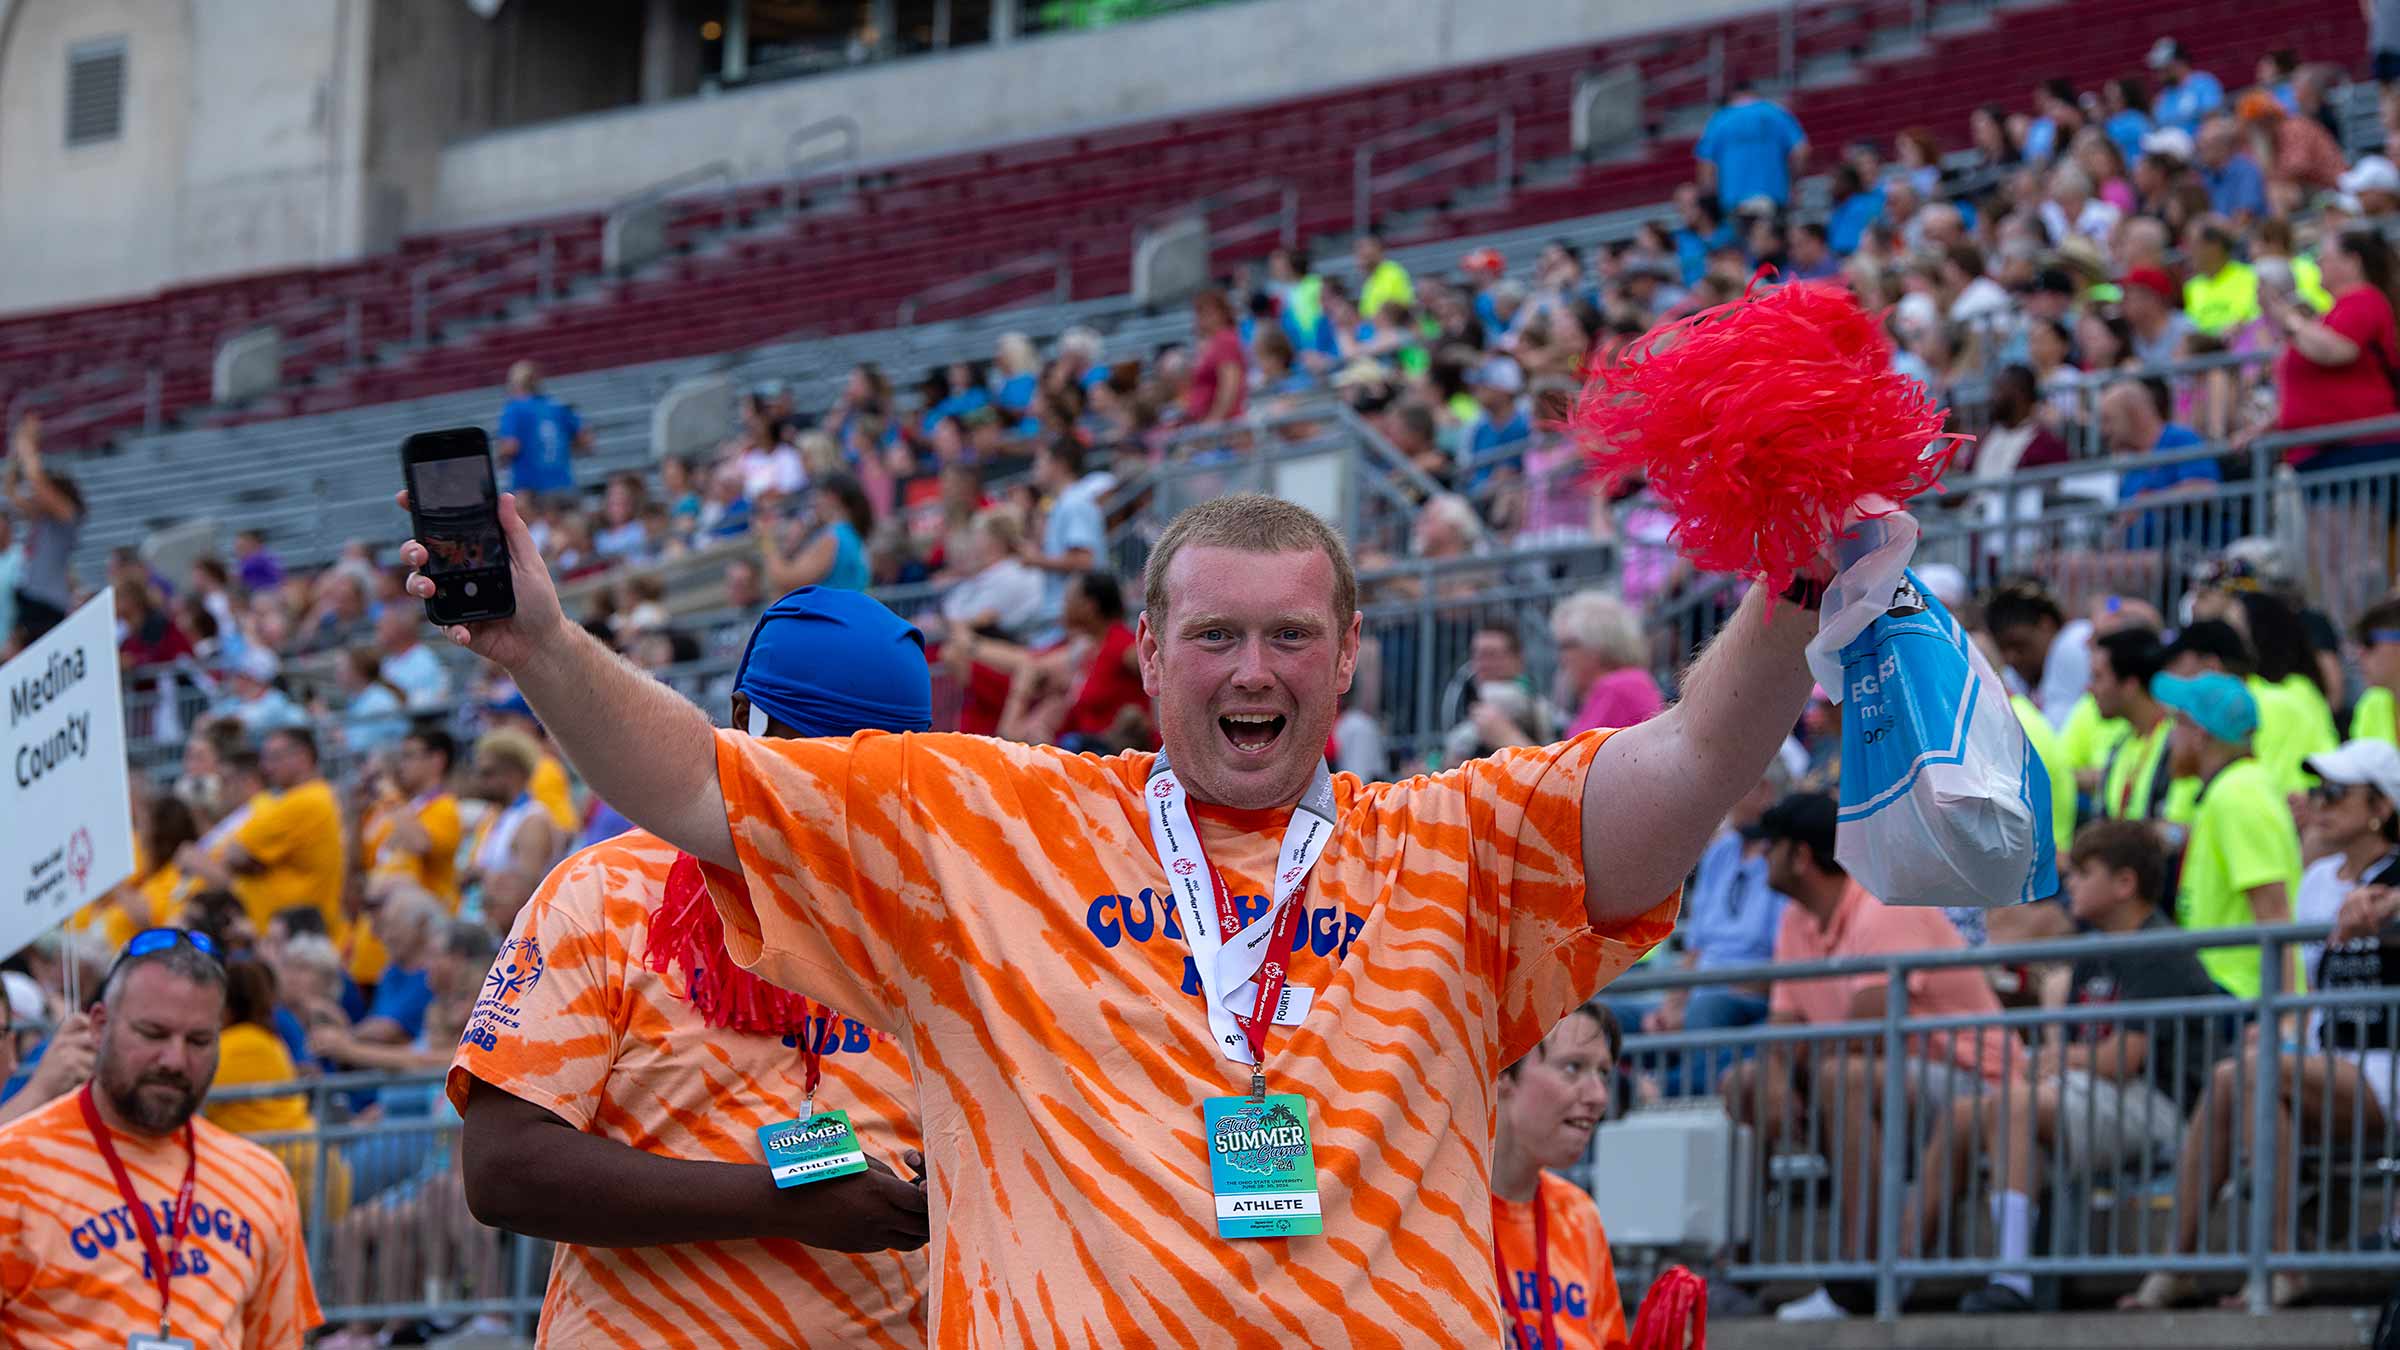 Special Olympics athlete cheering